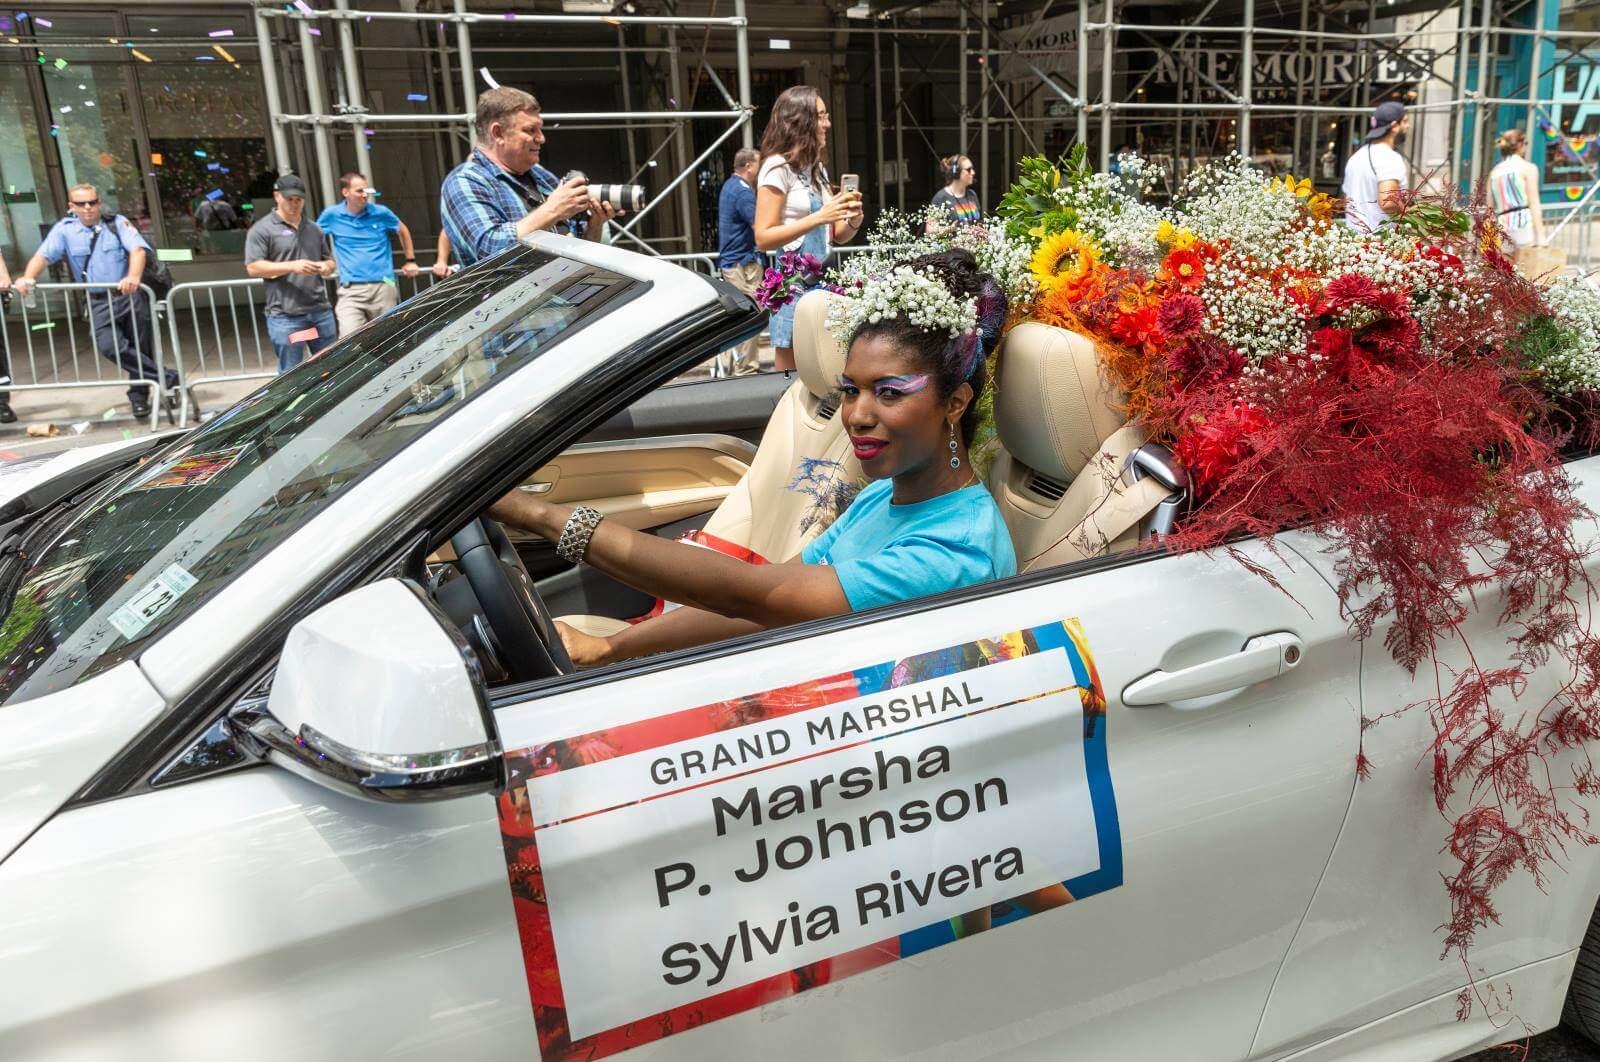 Image Credit: Shutterstock / lev radin <p><span>A transgender activist and contemporary of Marsha P. Johnson, Rivera was a fierce advocate for all who were marginalized, playing a critical role in the early stages of the LGBTQ+ rights movement.</span></p>